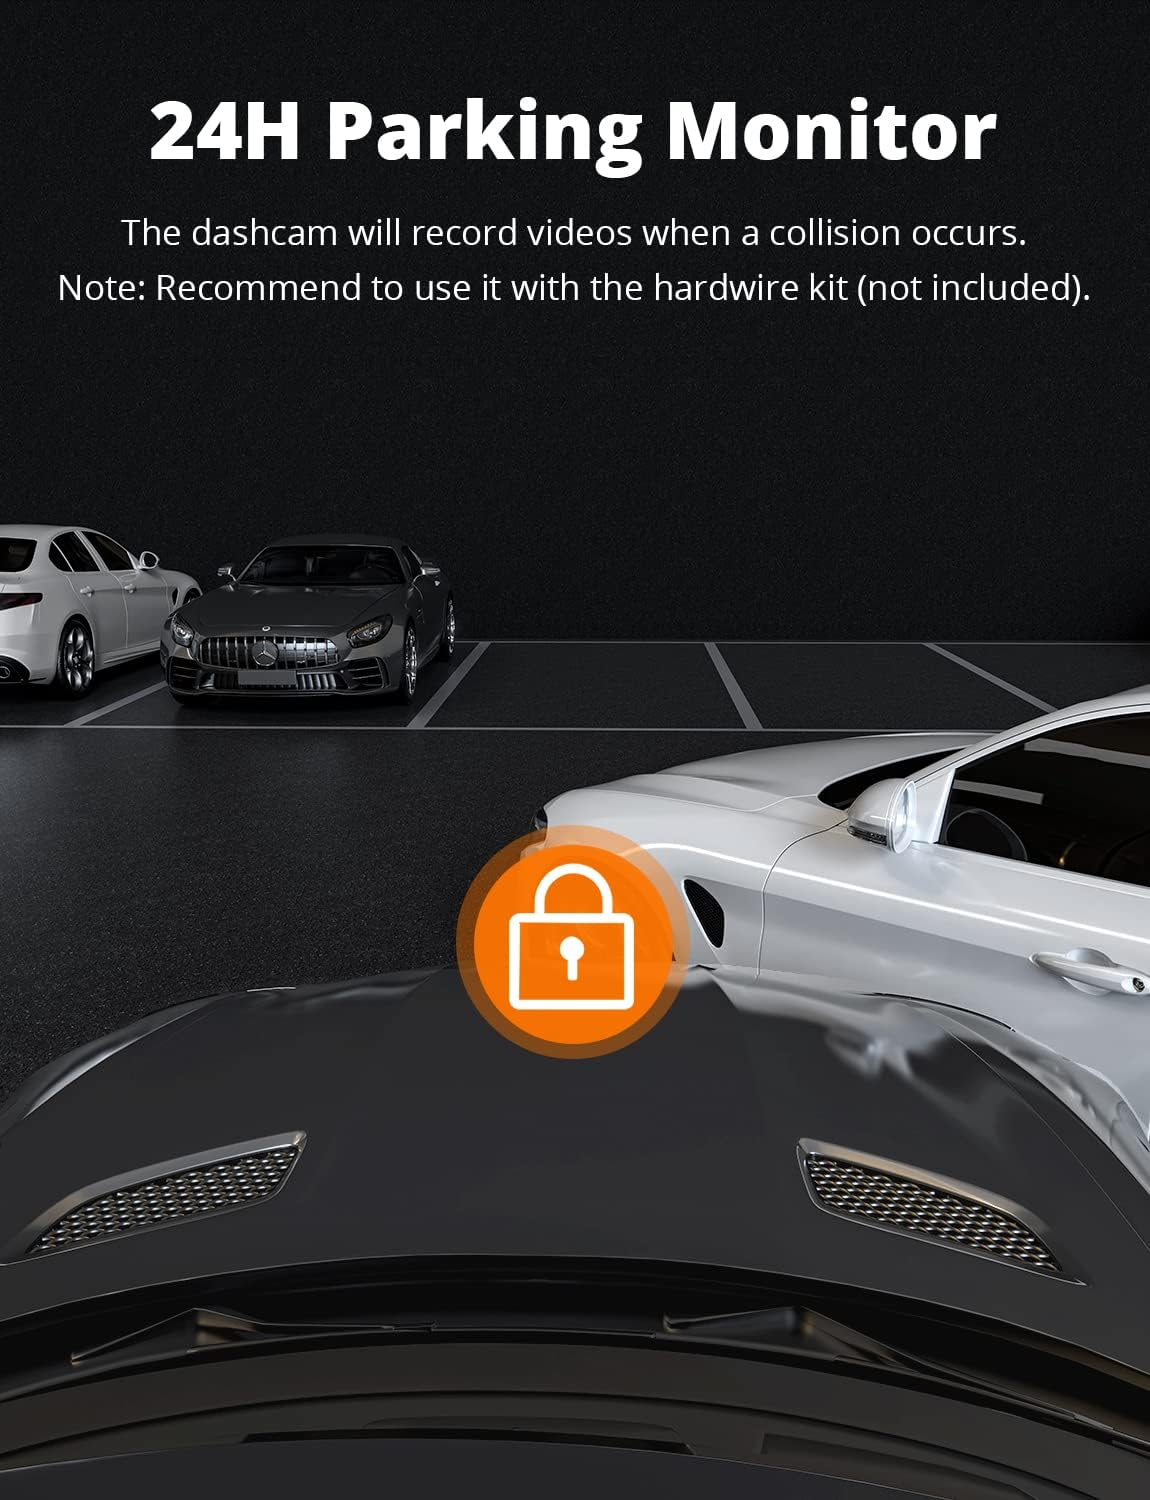 Kingslim D4 4K Dual Dash Cam with Built-in WiFi GPS, Front 4K/2.5K Rear 1080P Dual Dash Camera for Cars, 3 IPS Touchscreen 170° FOV Dashboard Camera with Sony Starvis Sensor, Support 256GB Max